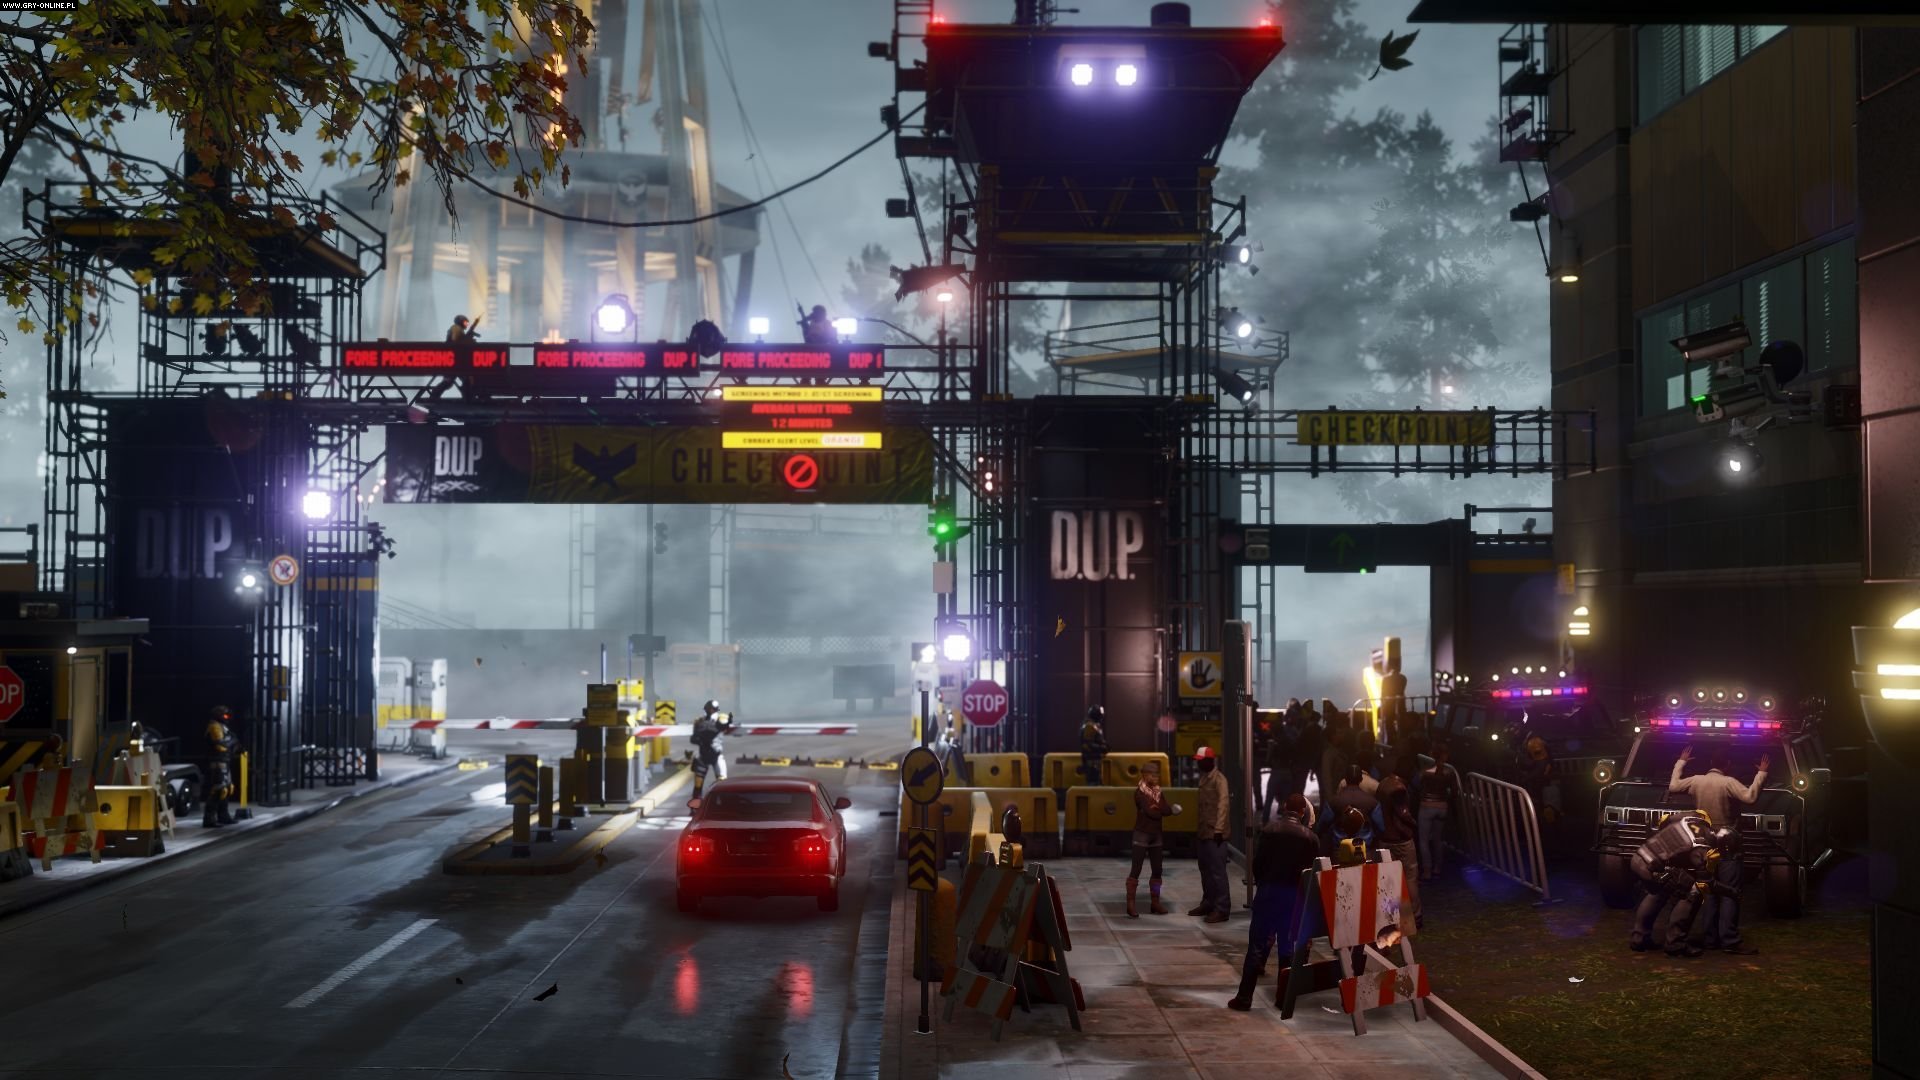 infamous: second son, video game